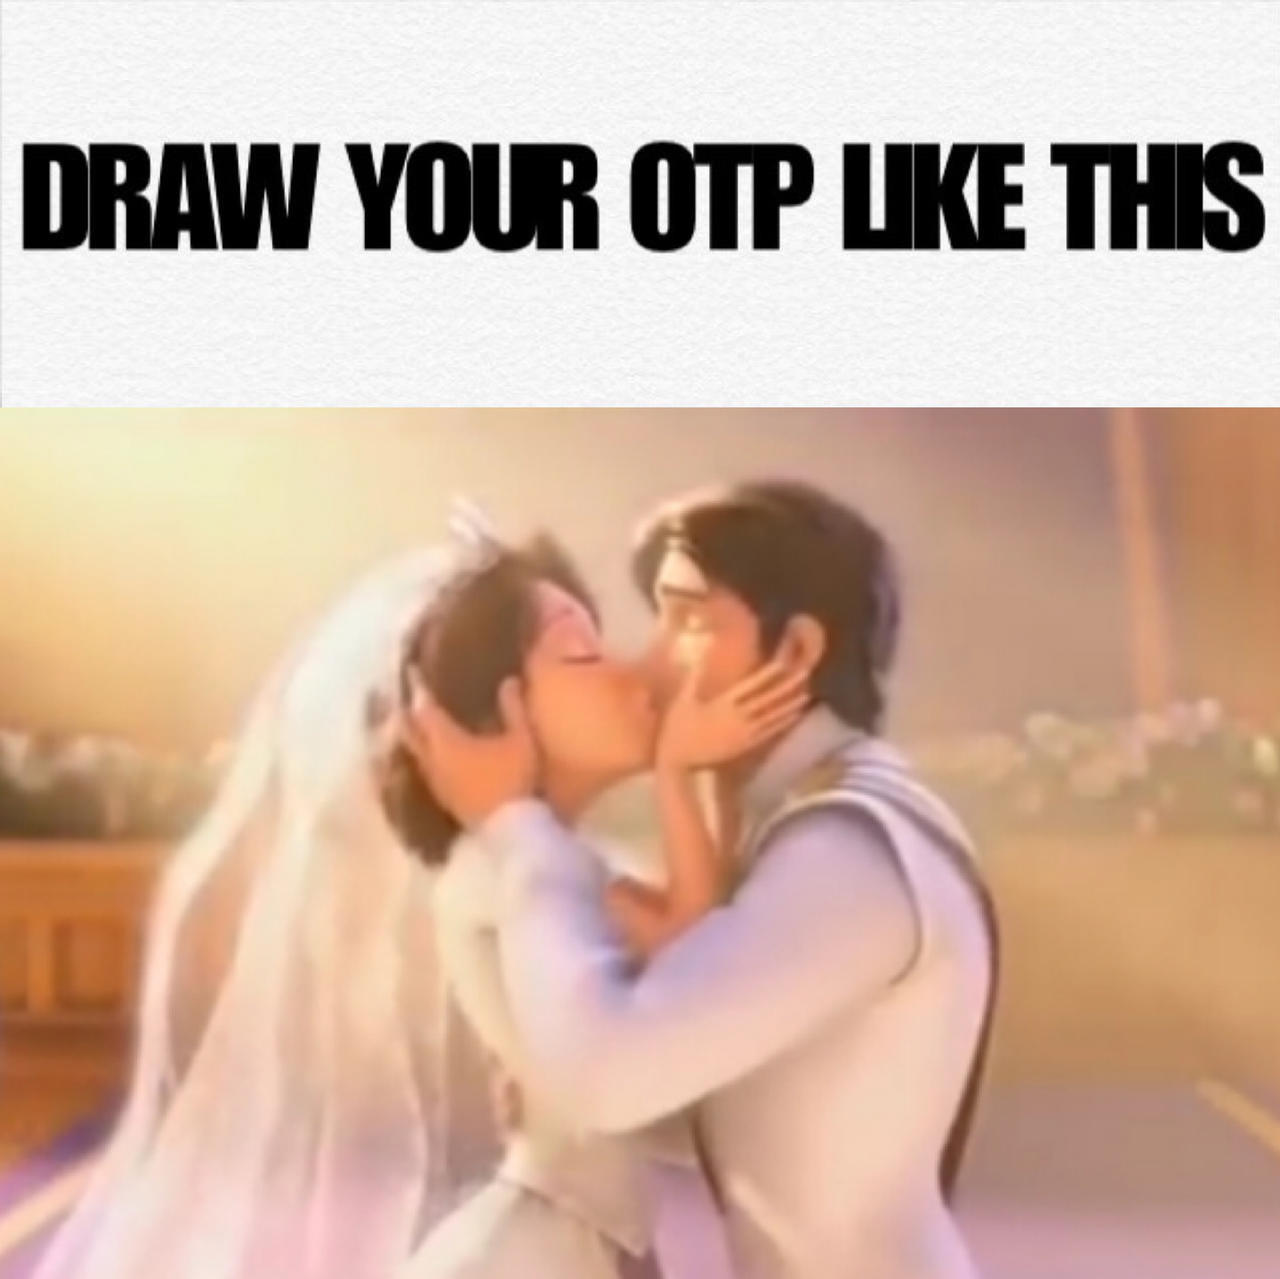 only a little tho — drawthisshitt: There you go! Draw your OTP and